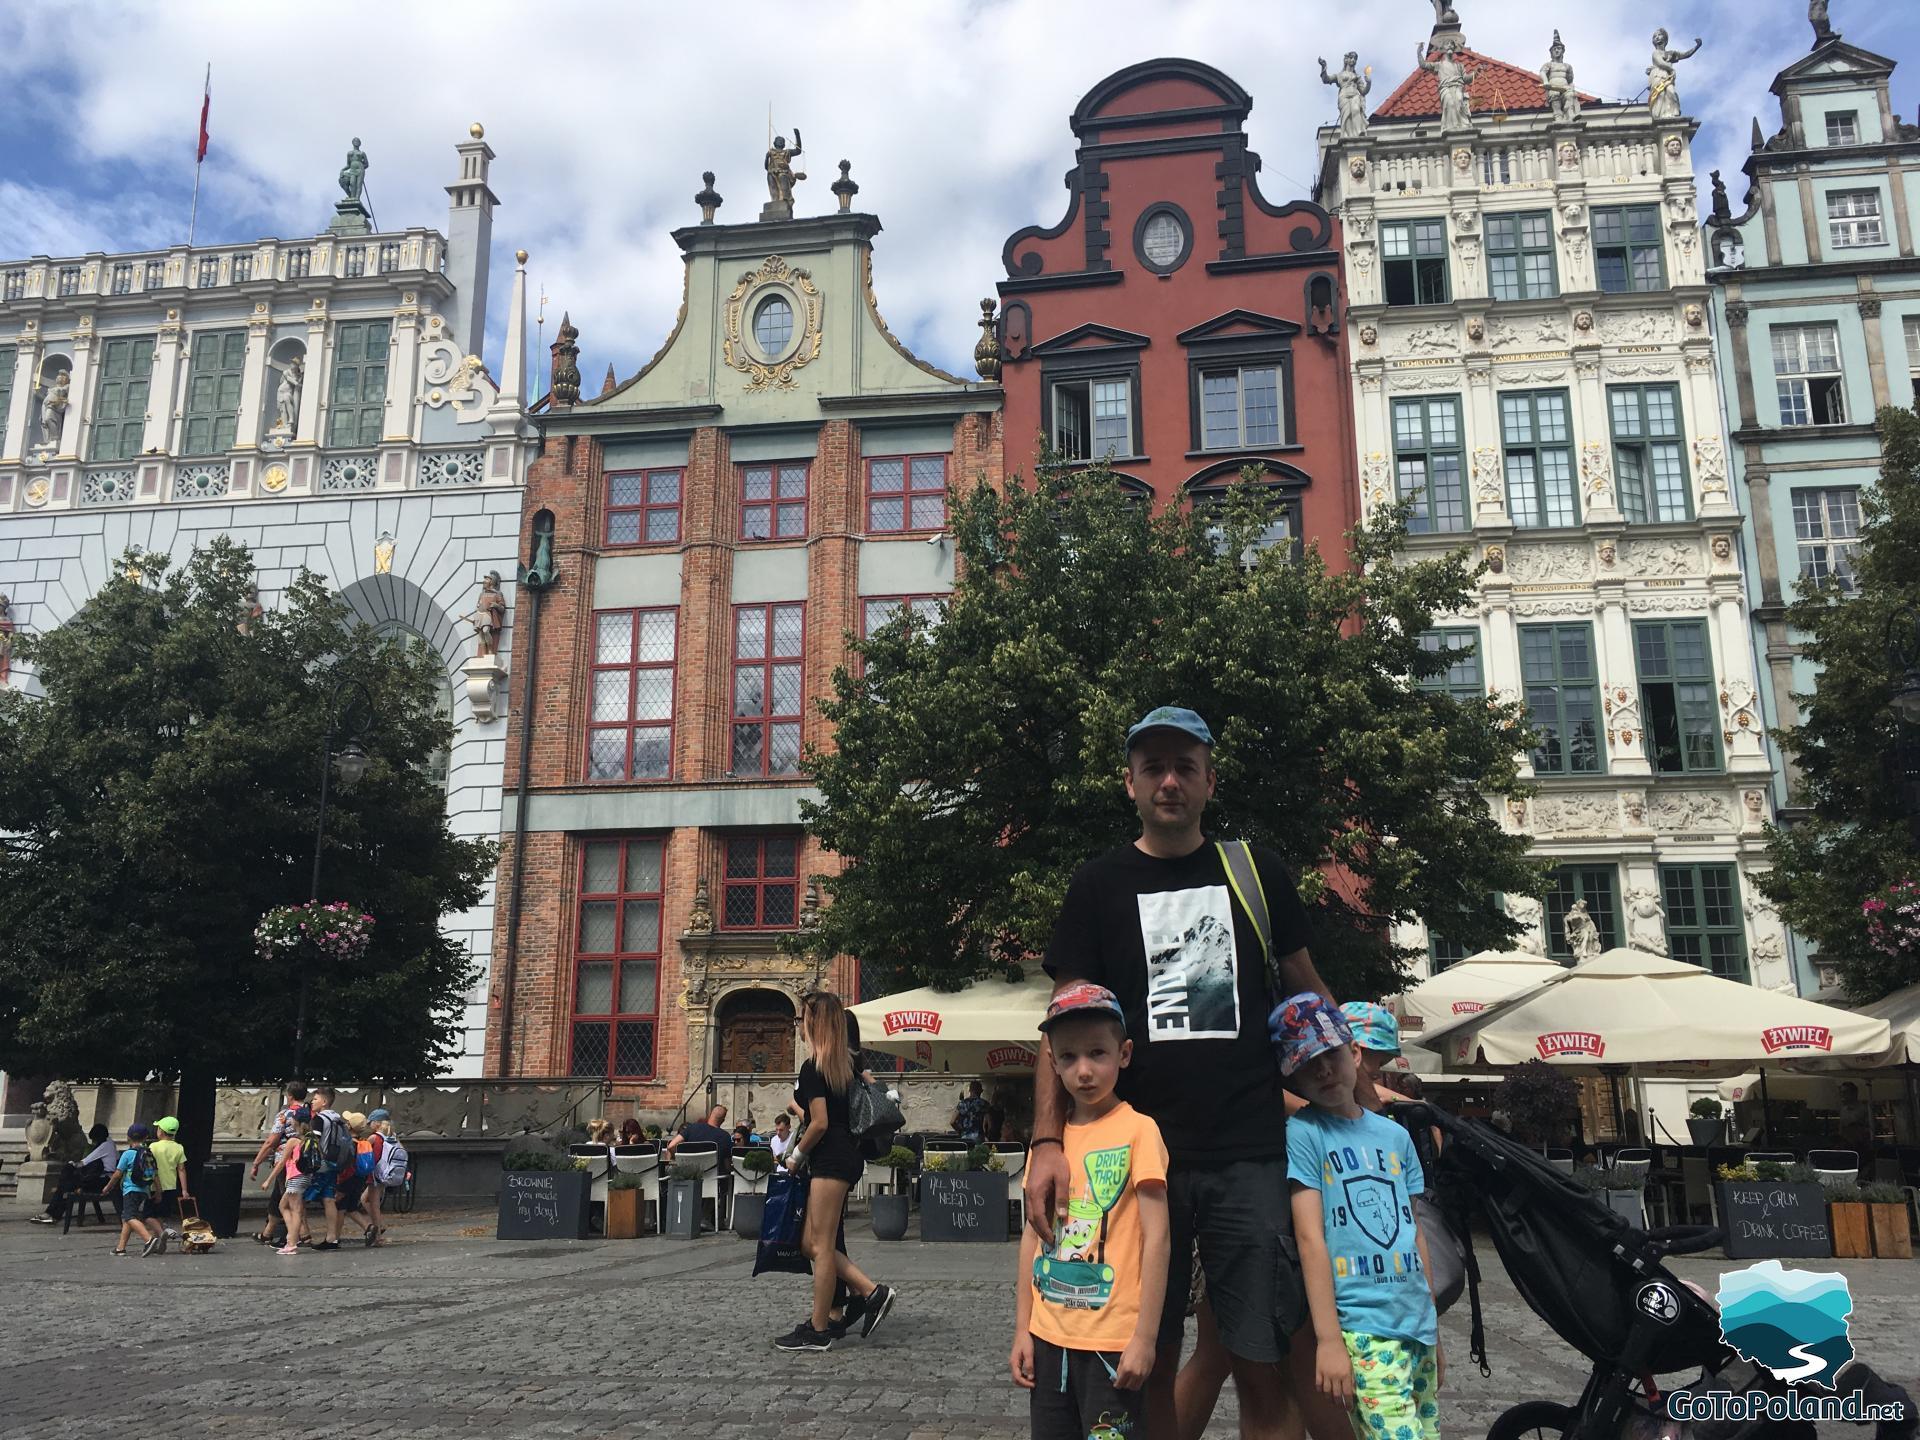 A man and two boys are standing in the Old Town square. Behind them are three trees and colorful tenement houses